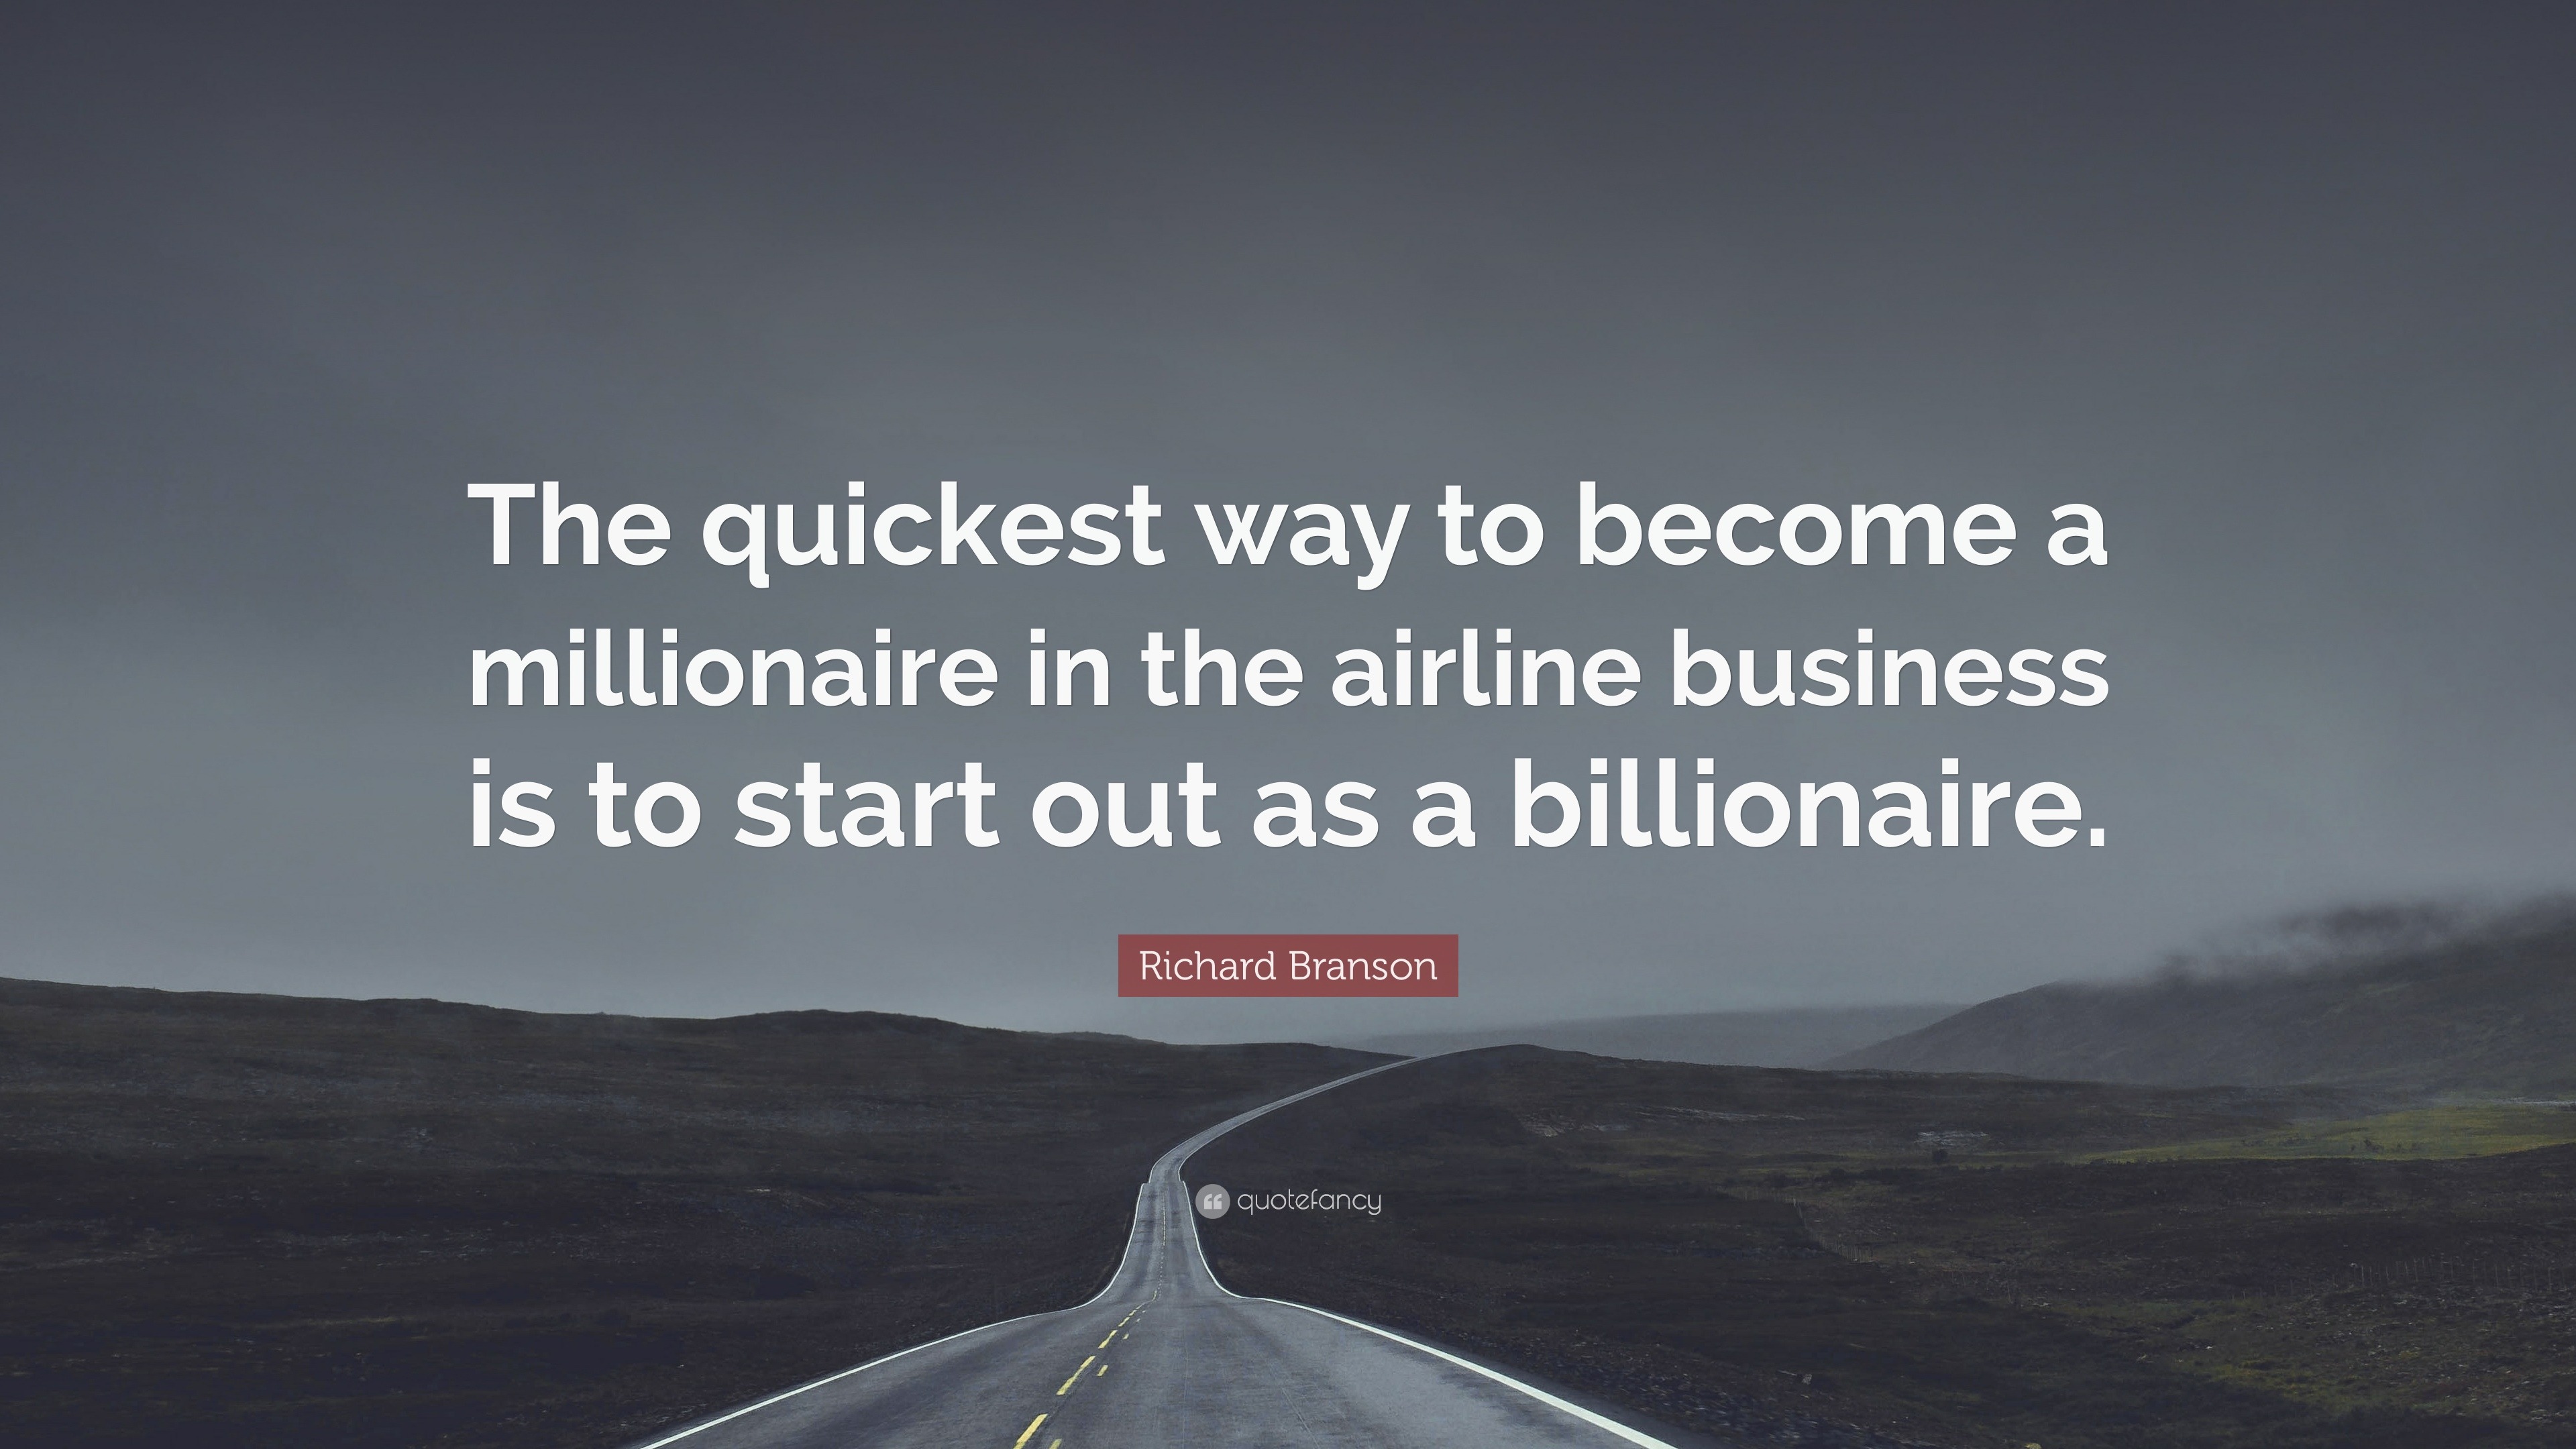 Richard Branson Quote: “The quickest way to become a millionaire in the  airline business is to